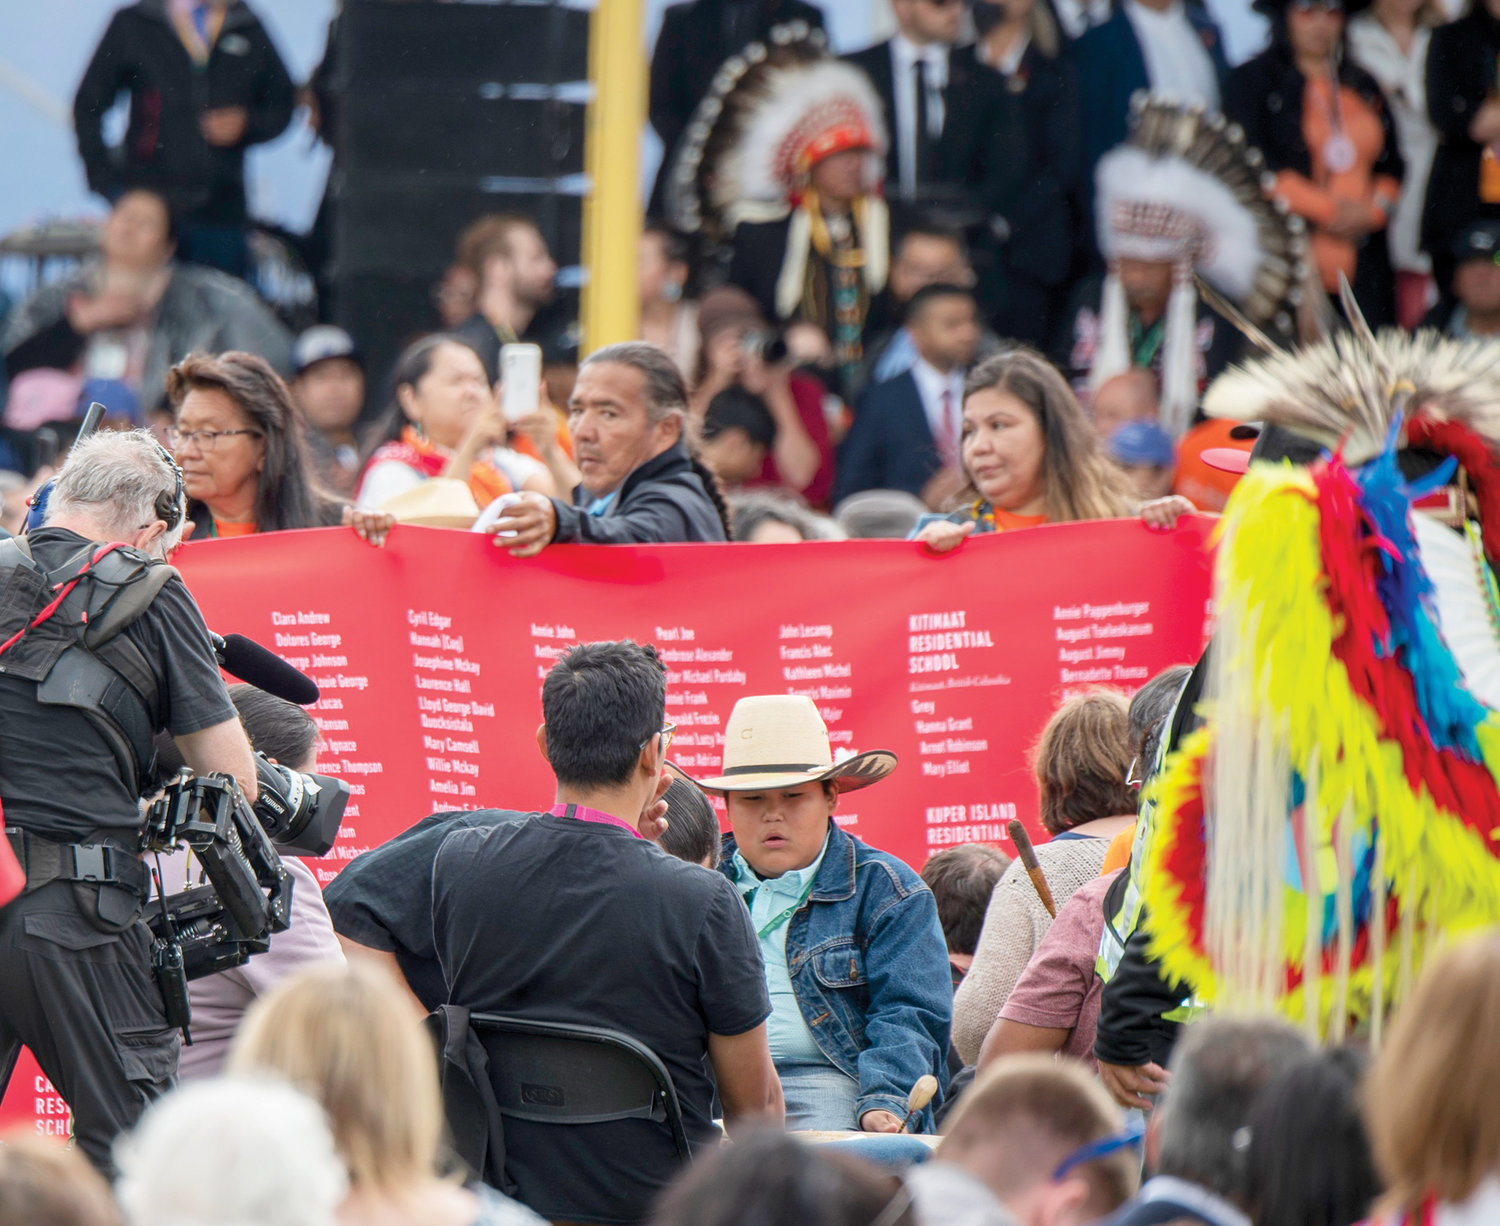 SAD TOLL—As the meeting with Pope Francis begins in Maskwacis, Alberta, July 25, Indigenous pilgrims carry a long red banner through the crowd. The banner bears the names of 4,120 Indigenous children and the residential school where they died.